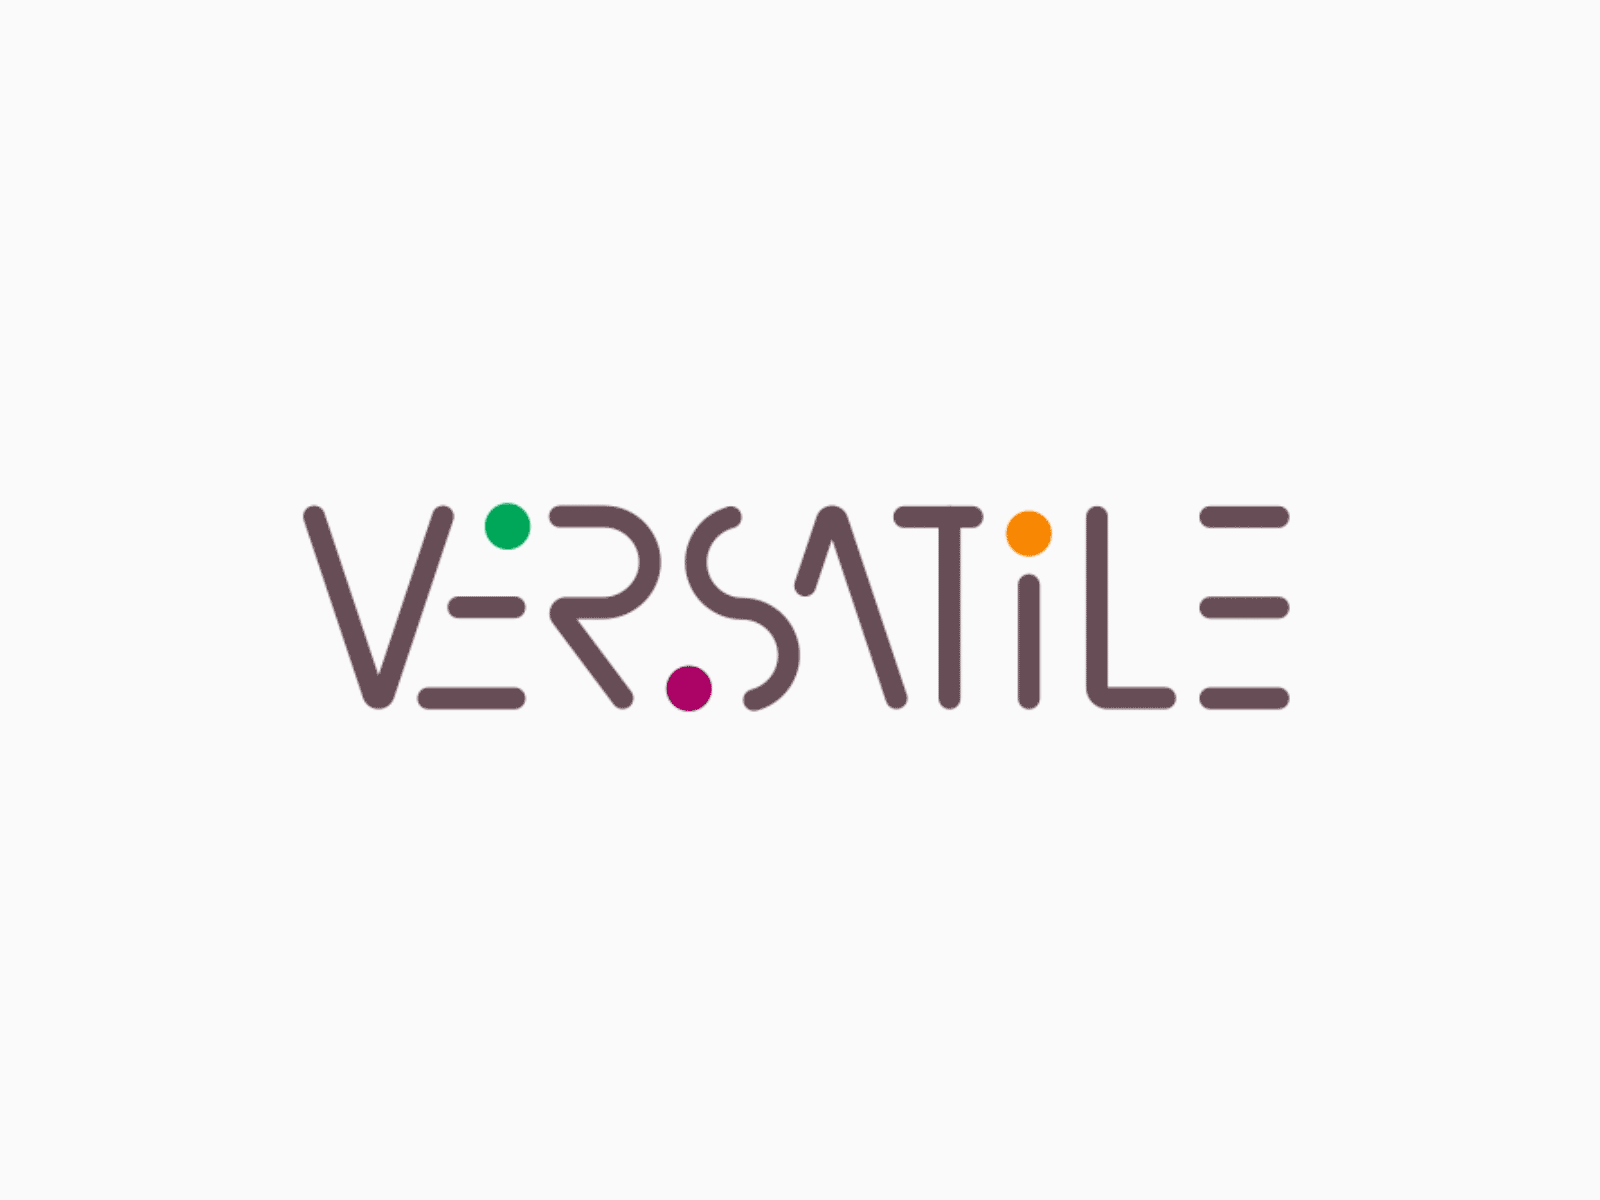 Versatile logo motion by Cynthia Hsiao on Dribbble